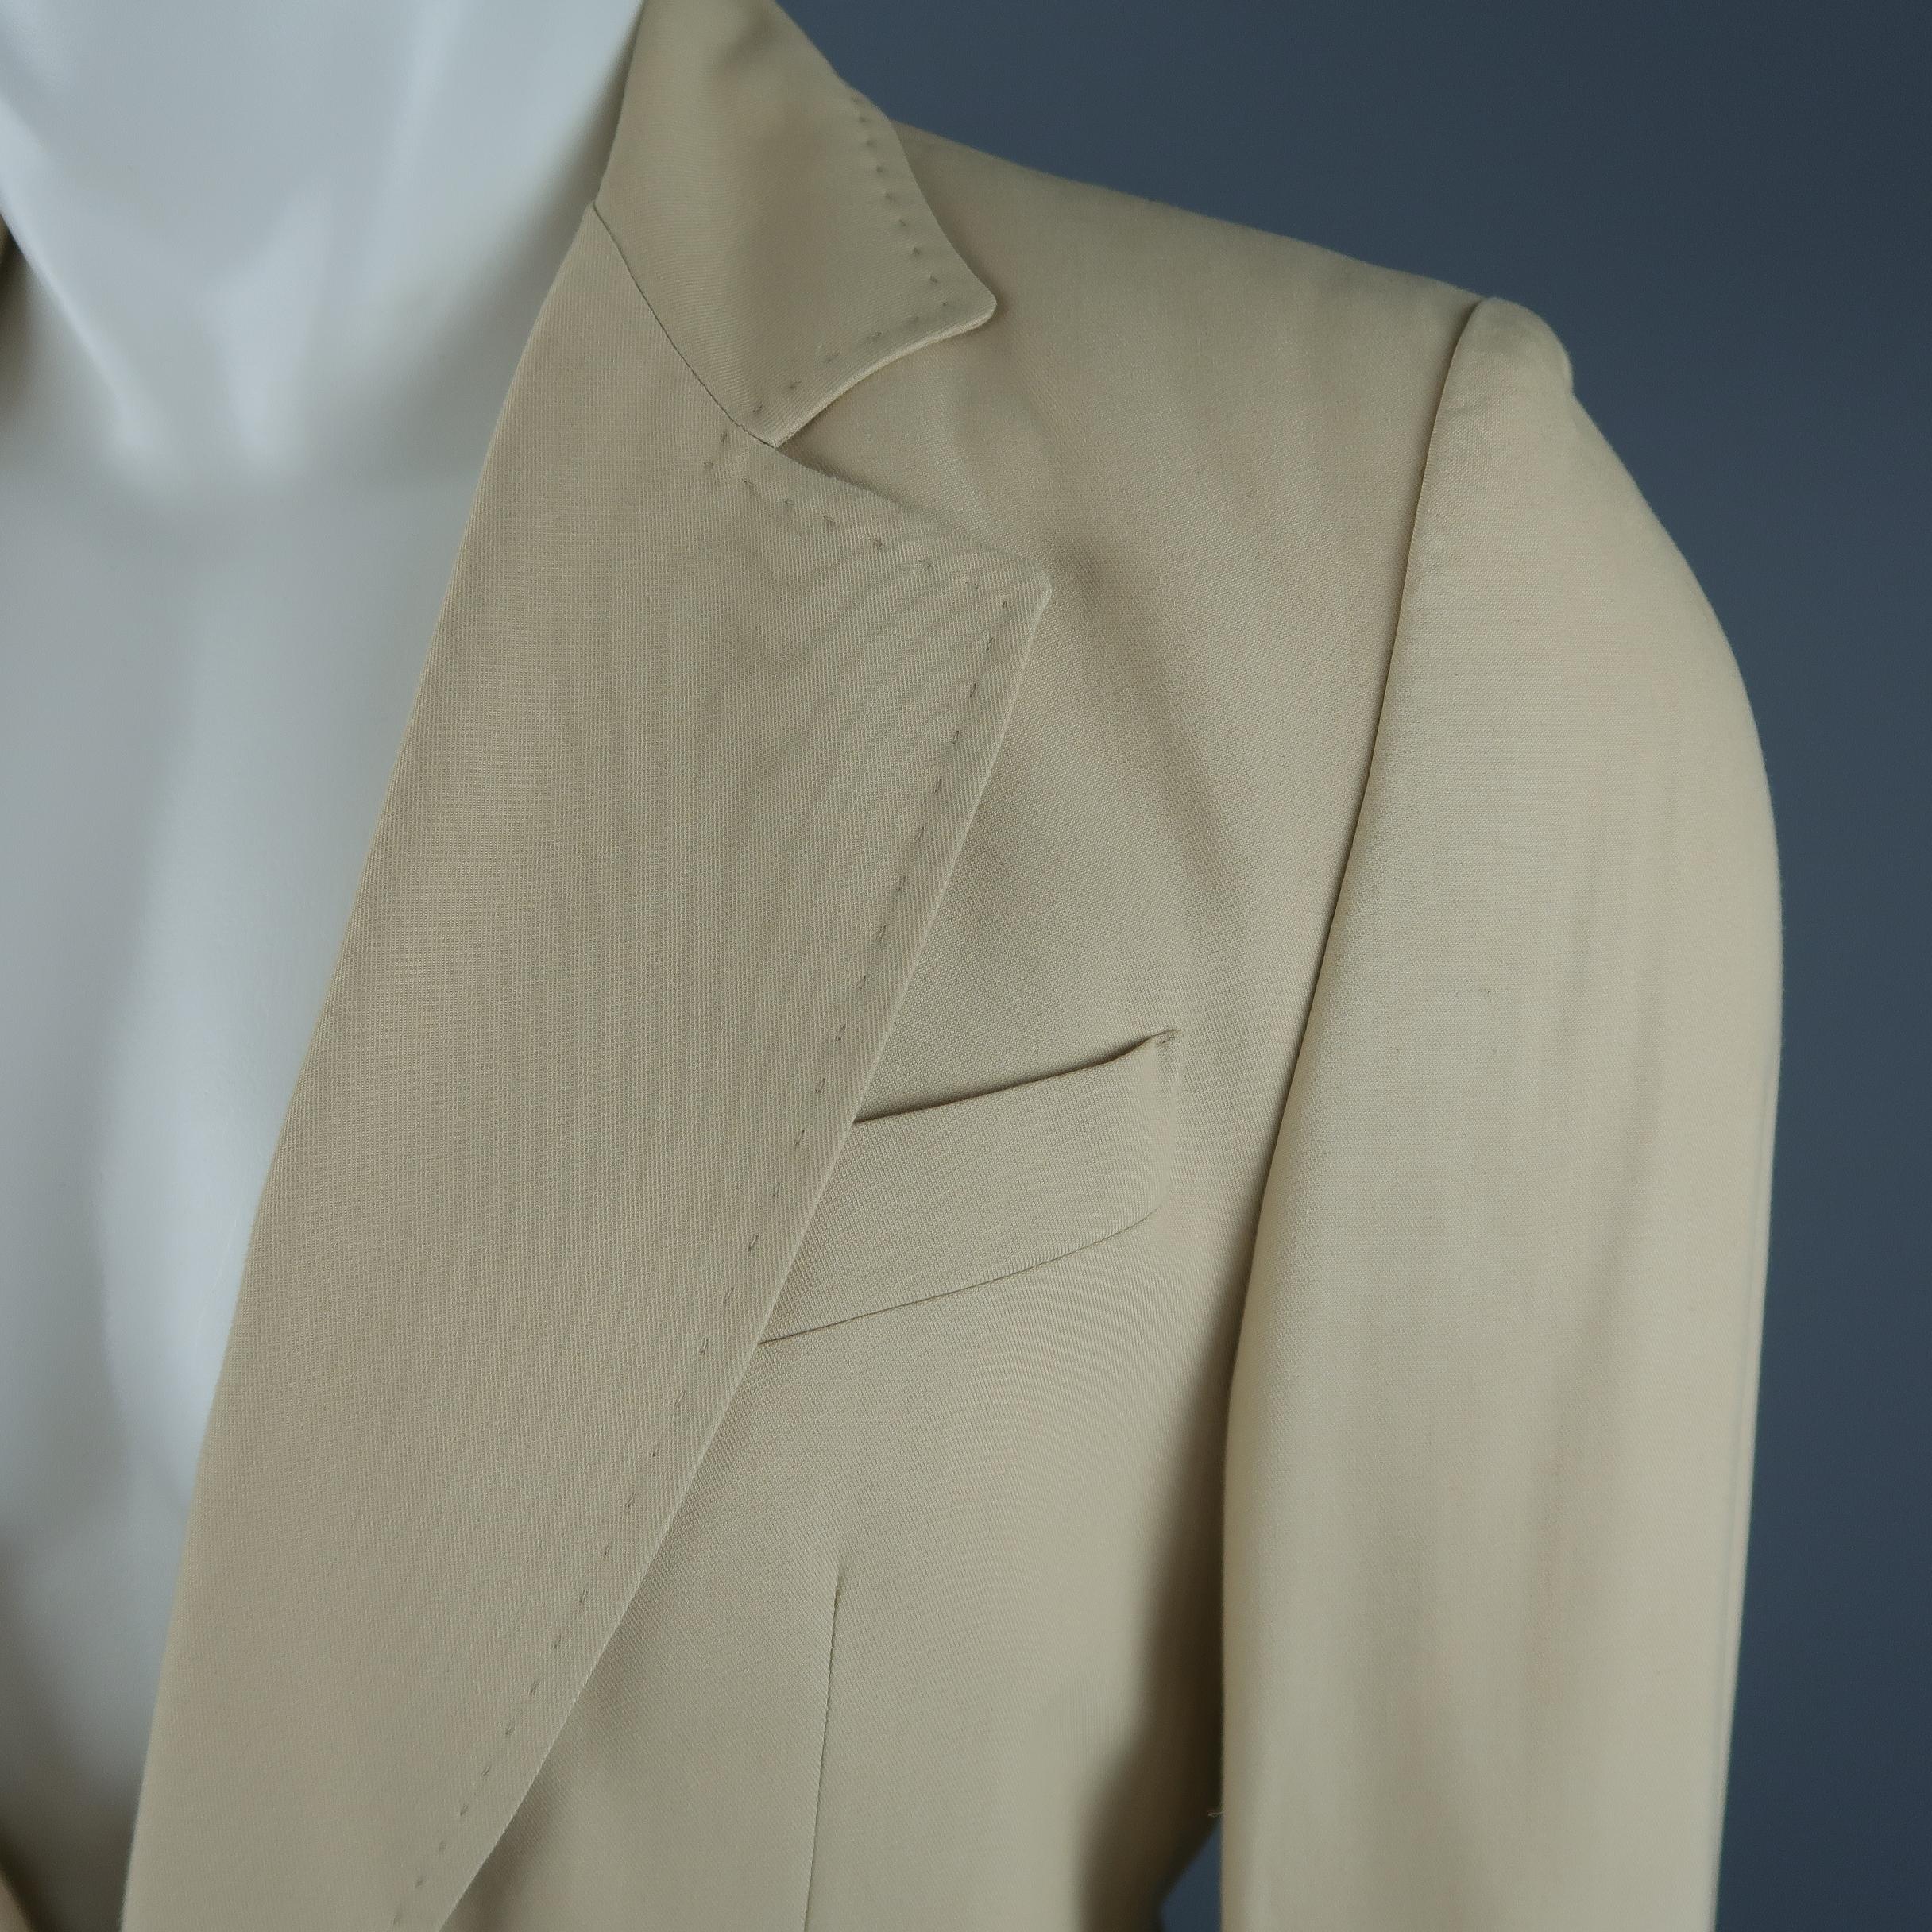 ANN DEMEULEMEESTER sport coat come sin khaki cotton blend twill with a top stitch notch lapel, two button closure, flap pockets, and functional button cuffs. Made in Italy.
 
Excellent Pre-Owned Condition.
Marked: S
 
Measurements:
 
Shoulder: 19